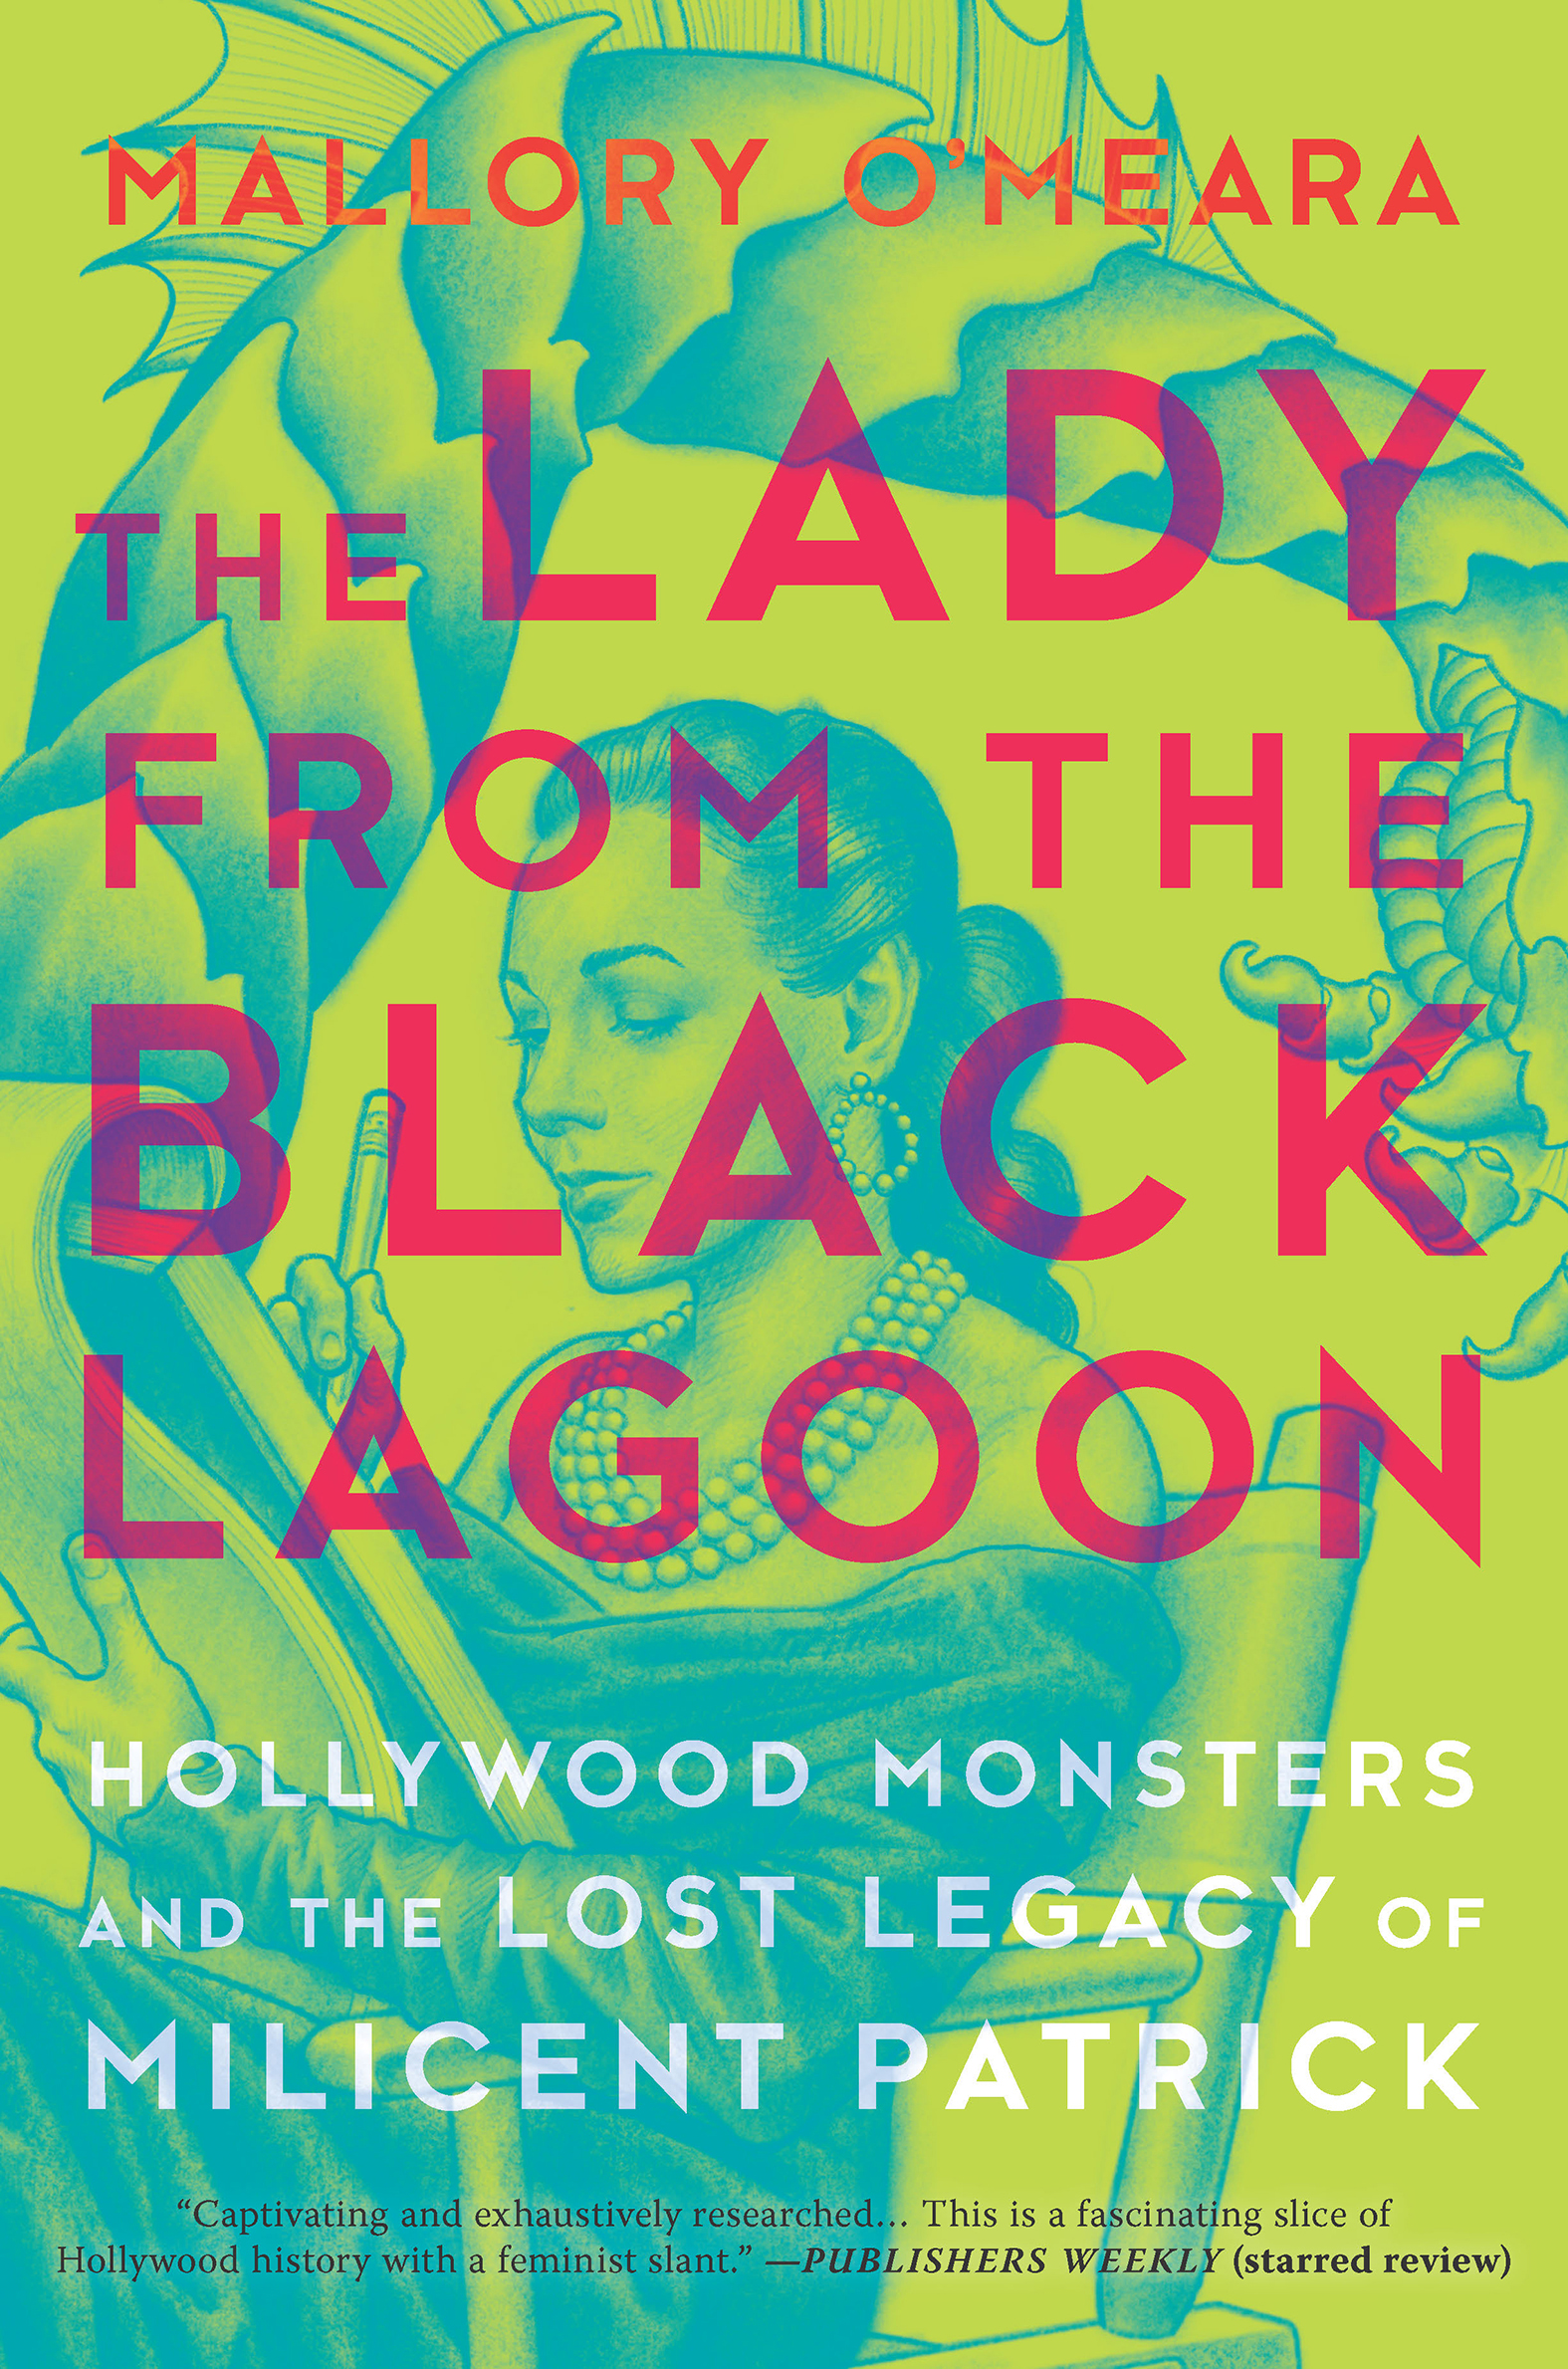 Image de couverture de The Lady from the Black Lagoon [electronic resource] : Hollywood Monsters and the Lost Legacy of Milicent Patrick